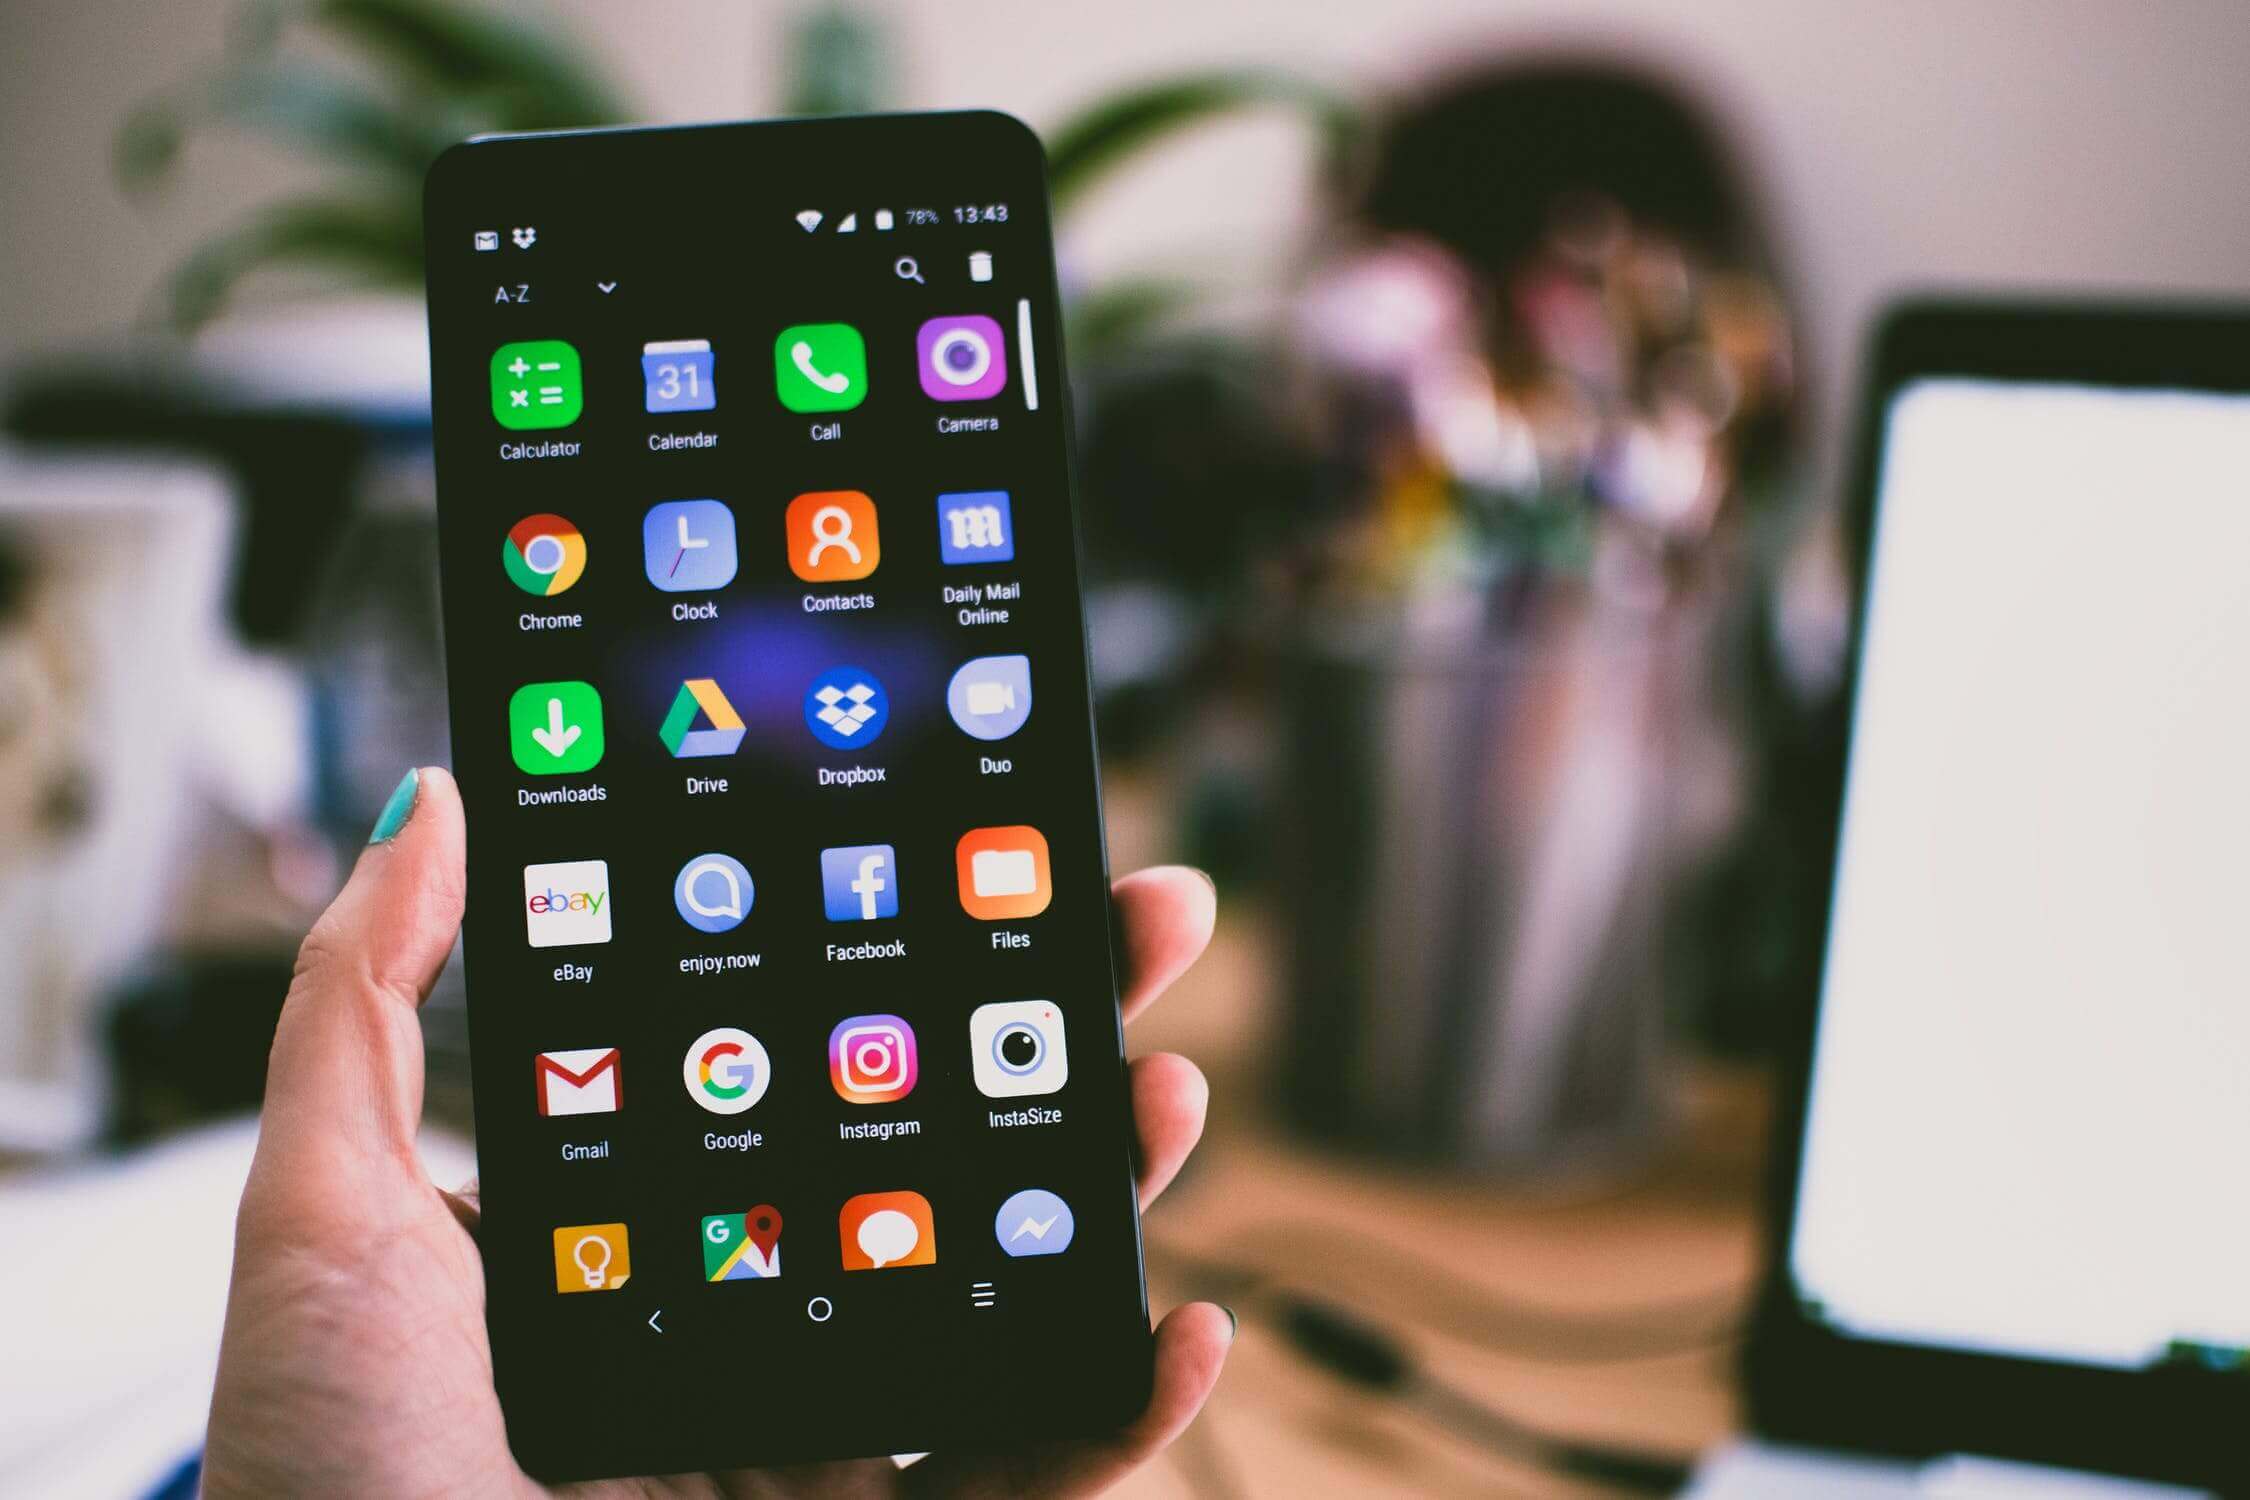 How to Send Apps on another Android Phone